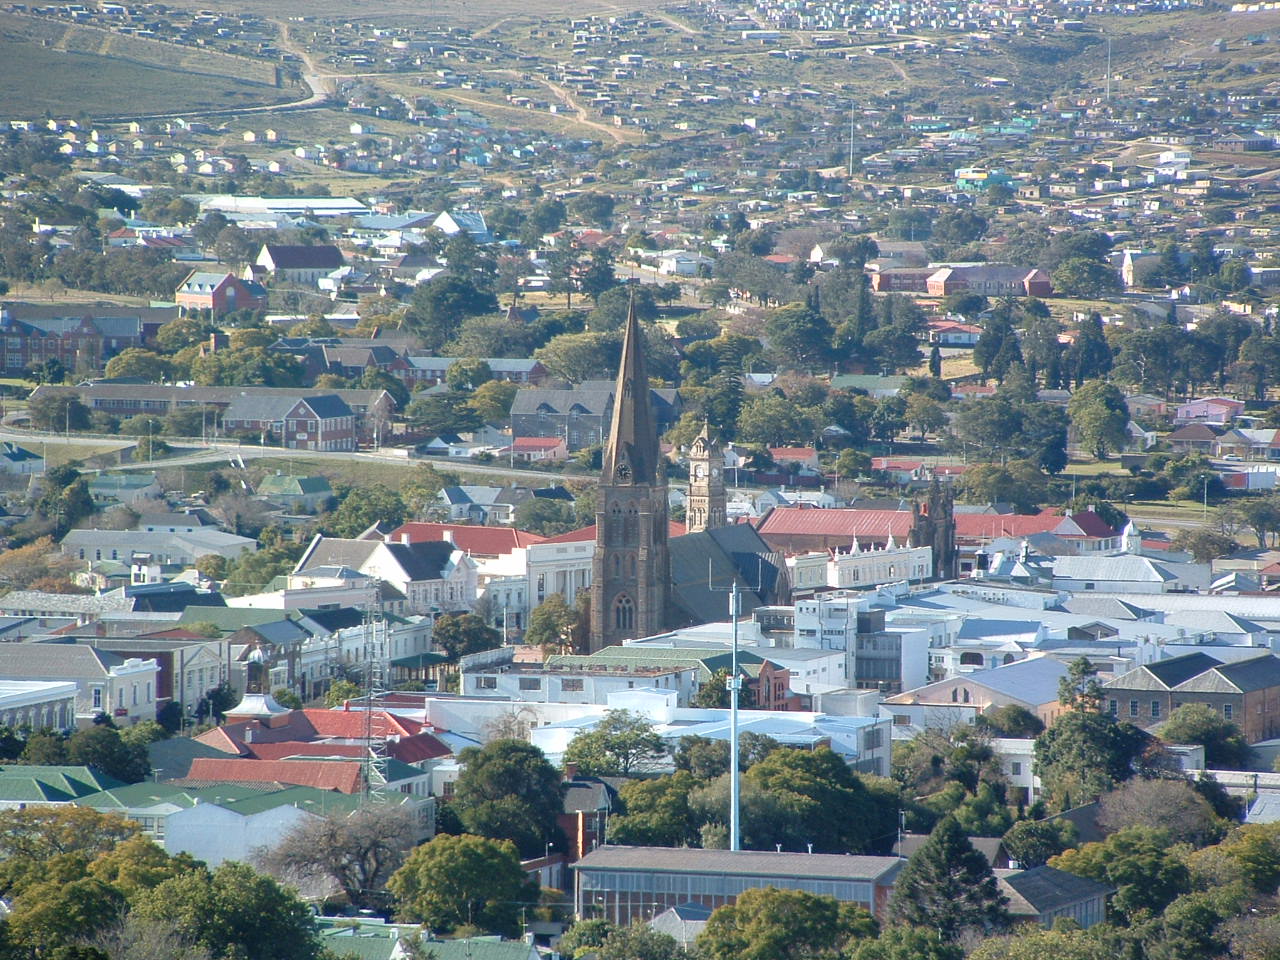 South Africa's City of Saints